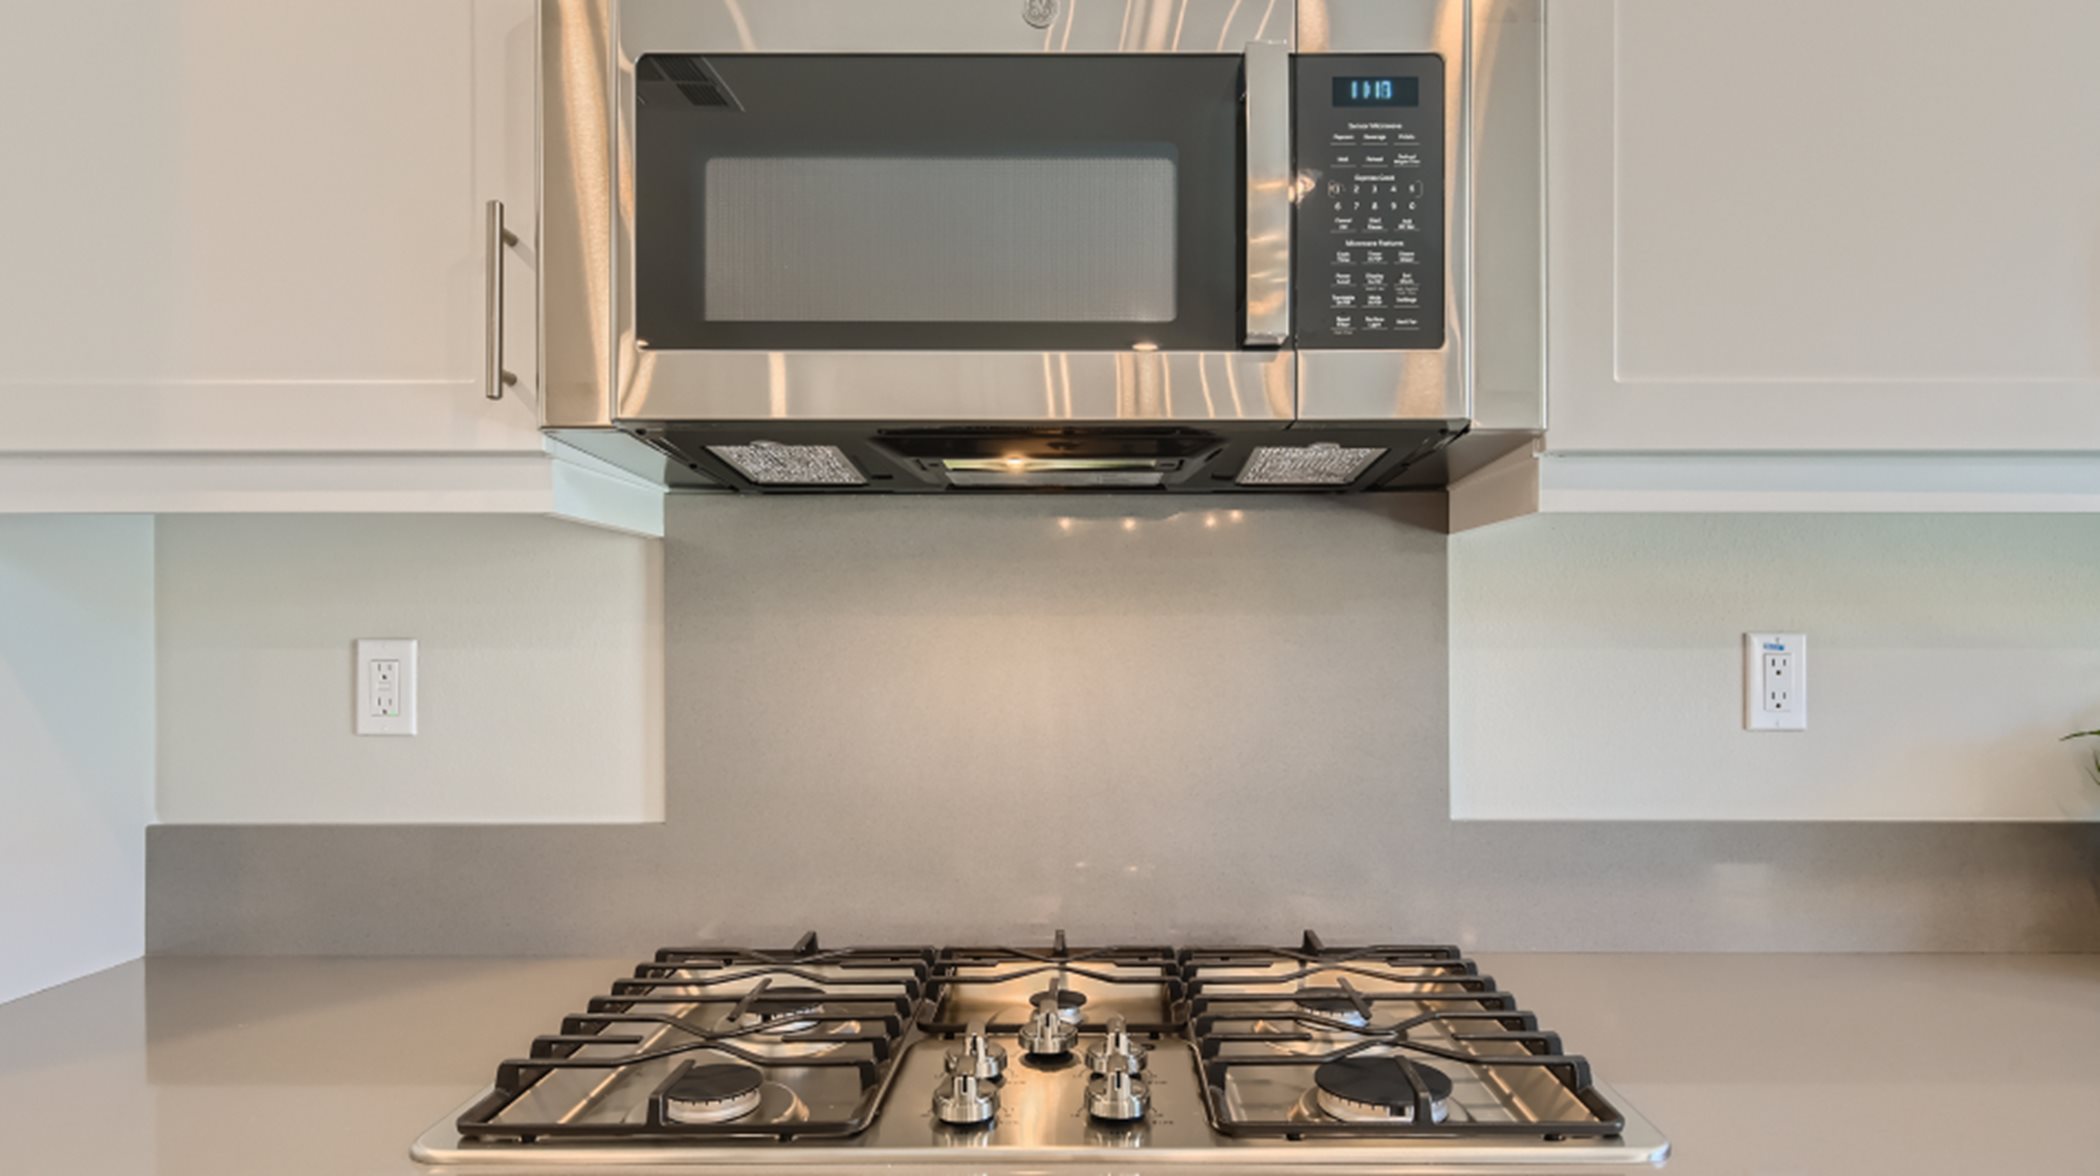 Microwave and cooktop